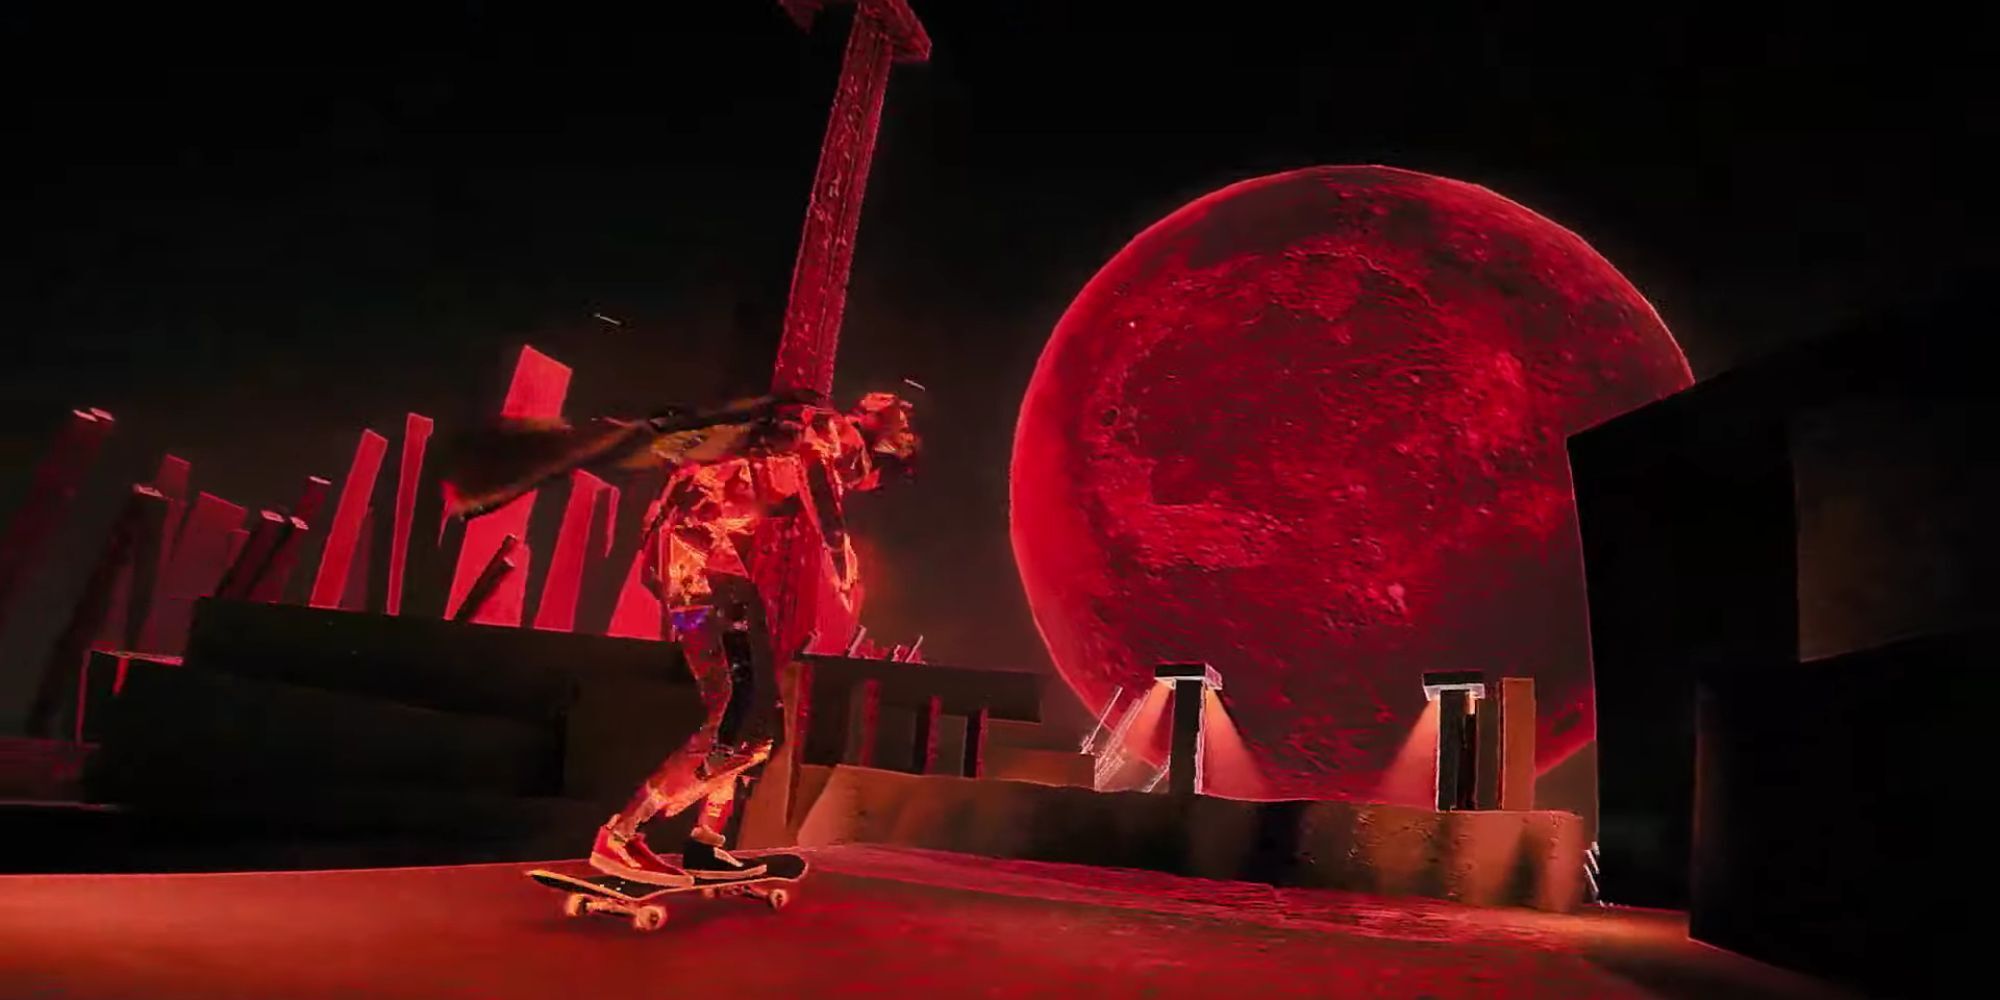 Glass person on a skateboard with a large red moon in the background